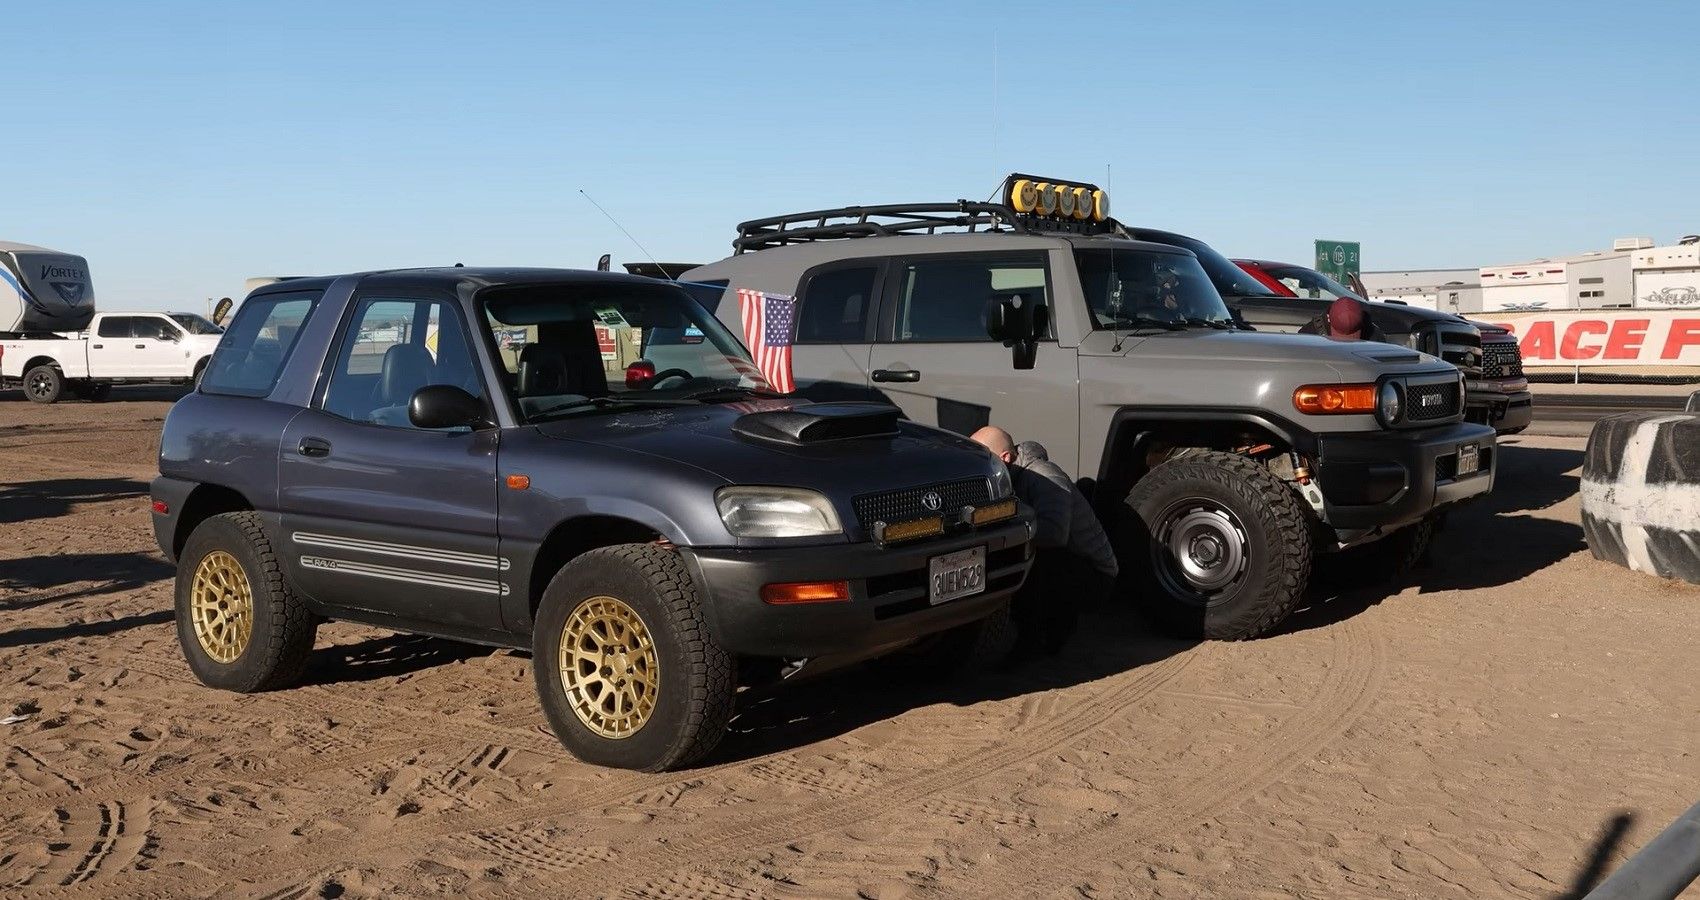 Toyota RAV4 and Toyota FJ Cruiser front quarter view of both, side by side